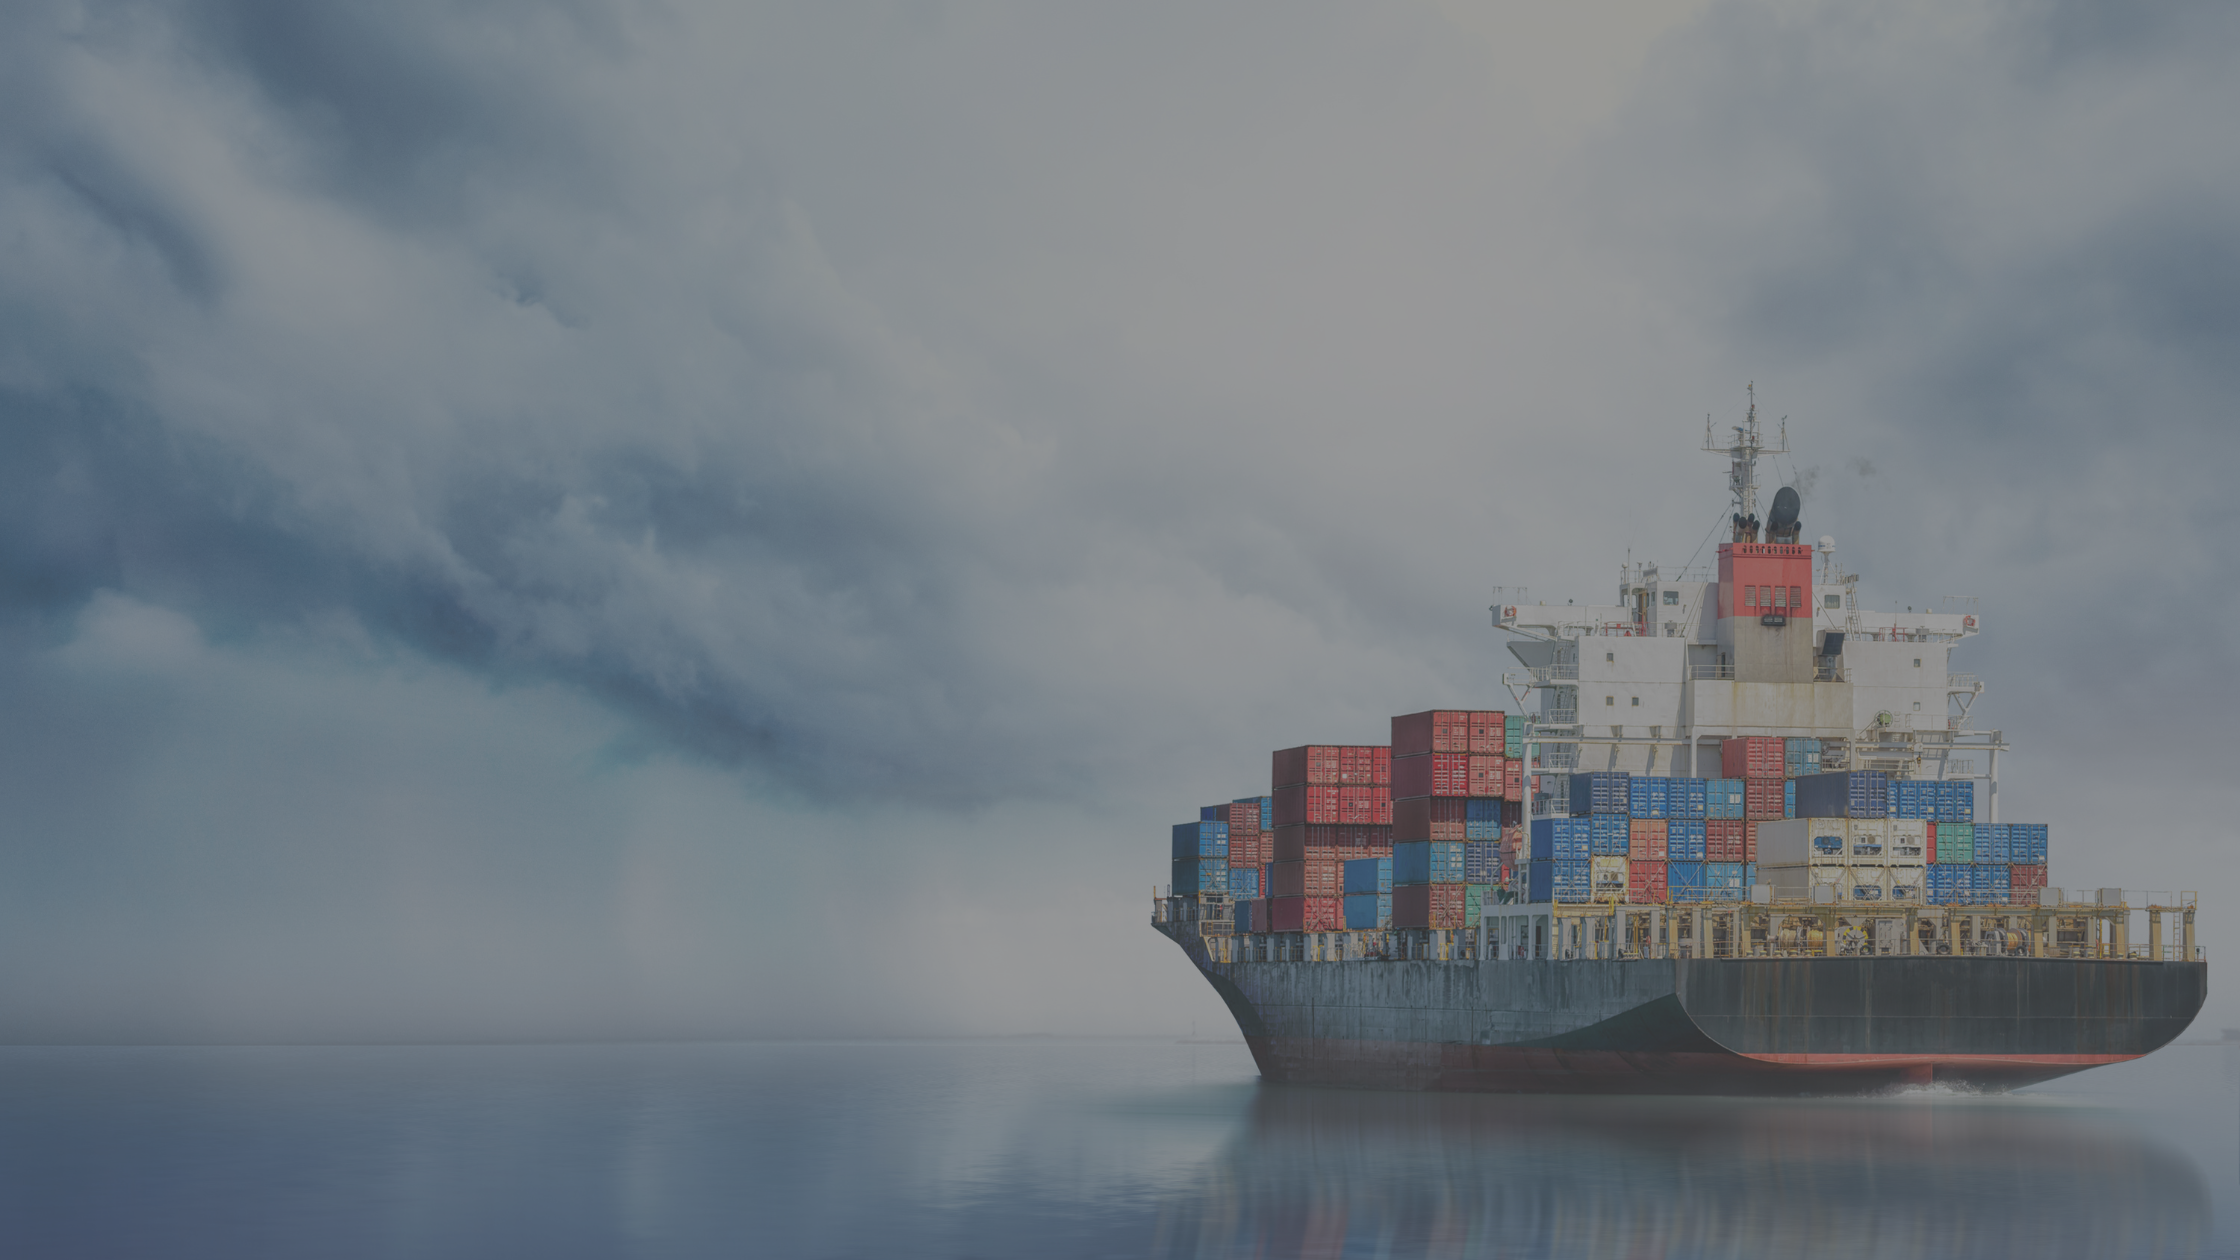 Ocean Freight Prices on the Decline